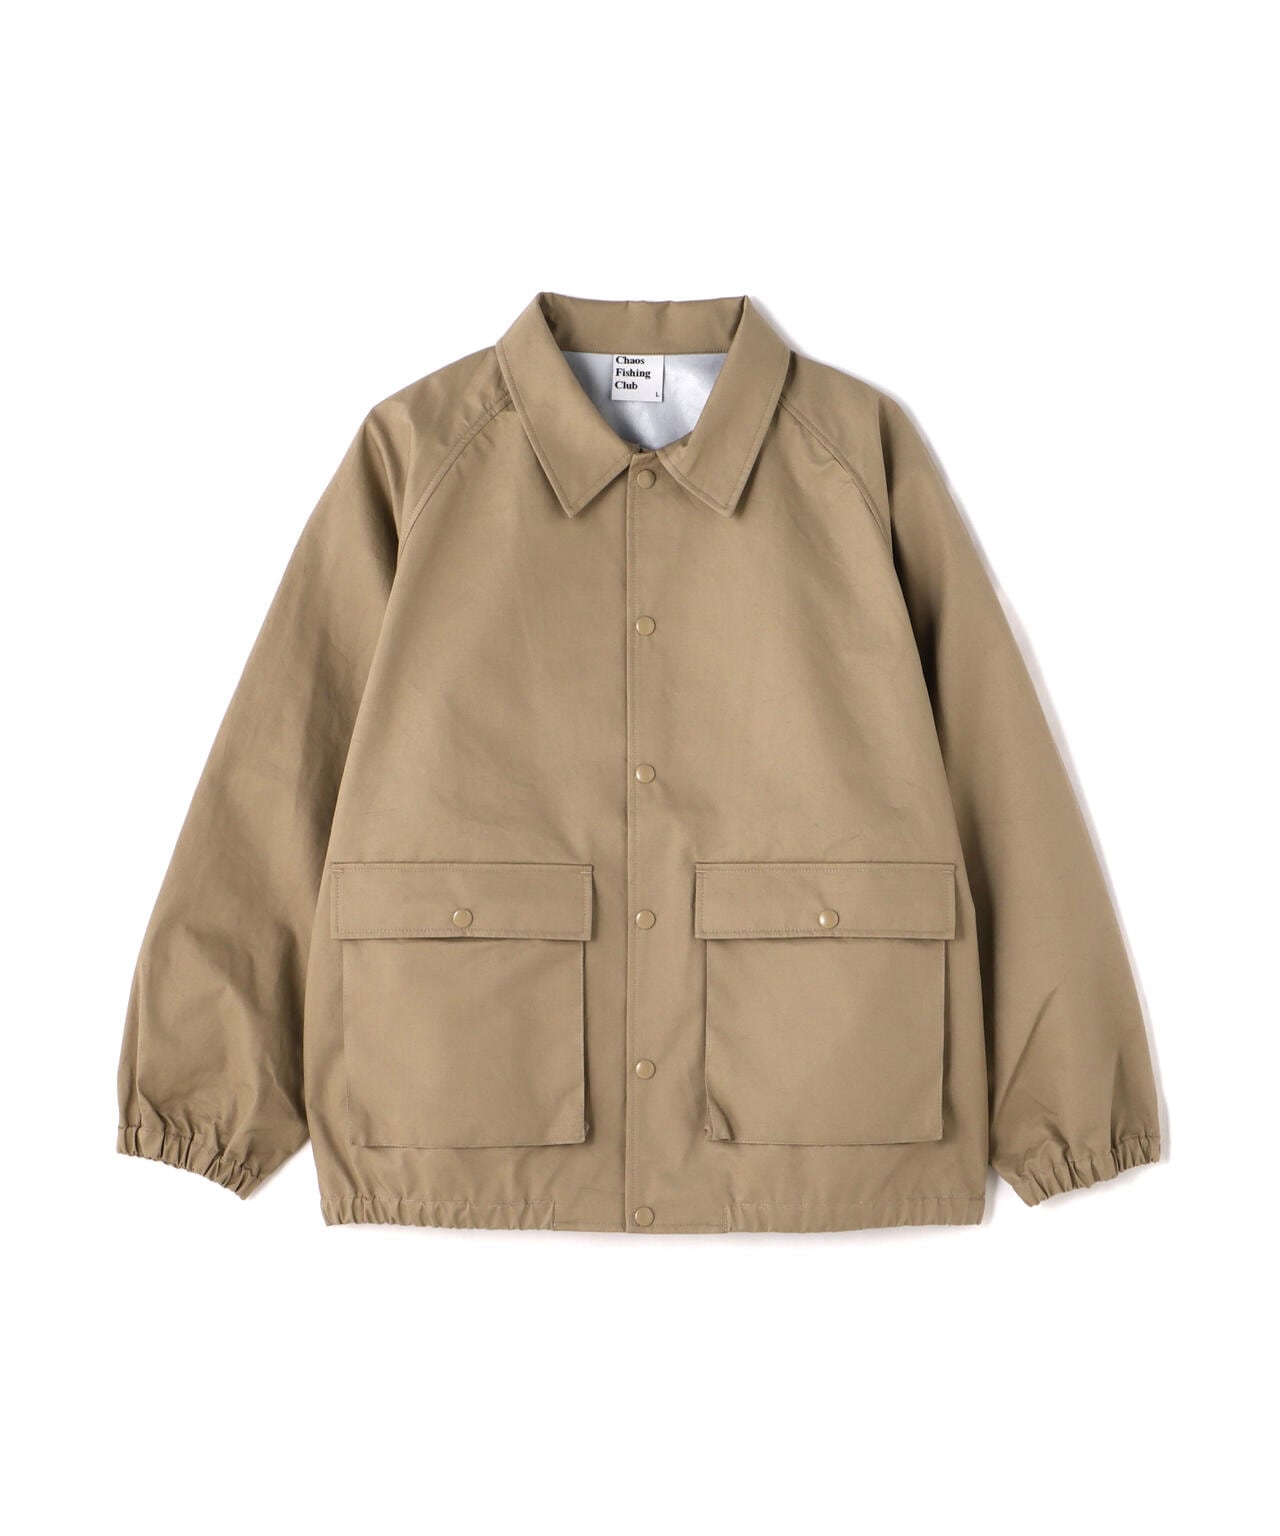 Chaos Fishing Club / C-FC JACKET  Official mail order / JACK in